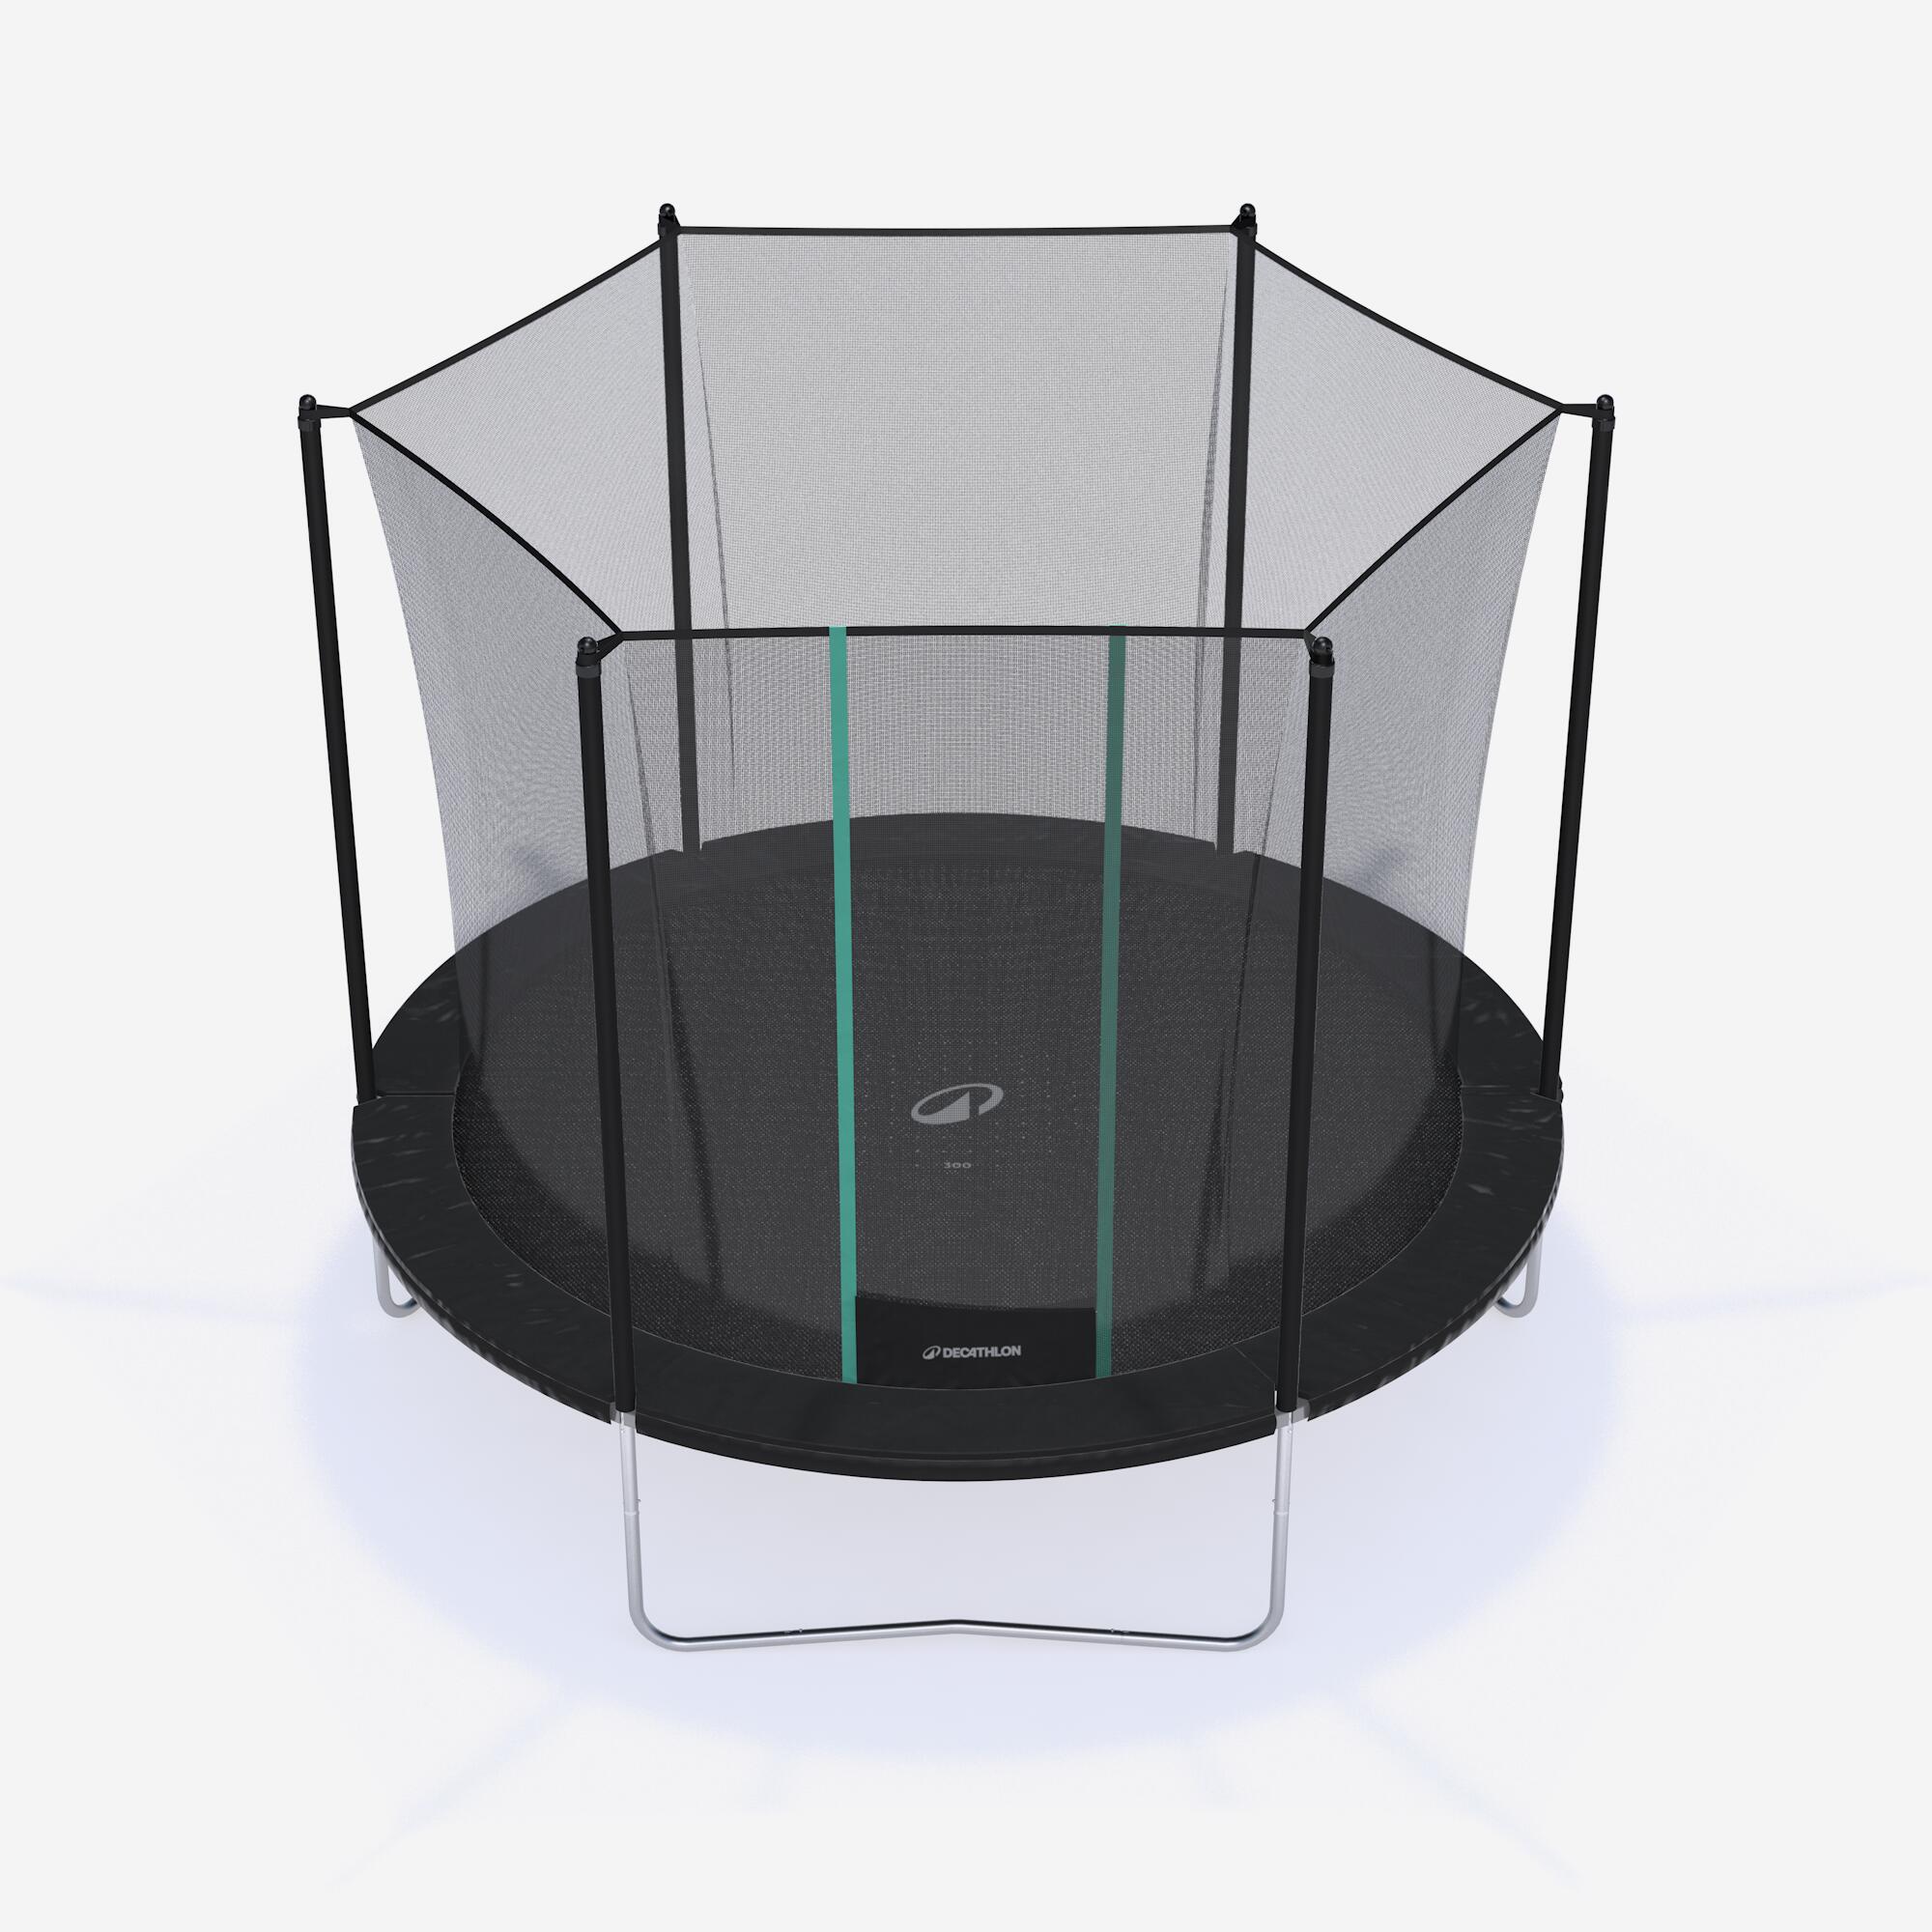 Trampoline 300 with Netting - Tool-Free Design 1/6